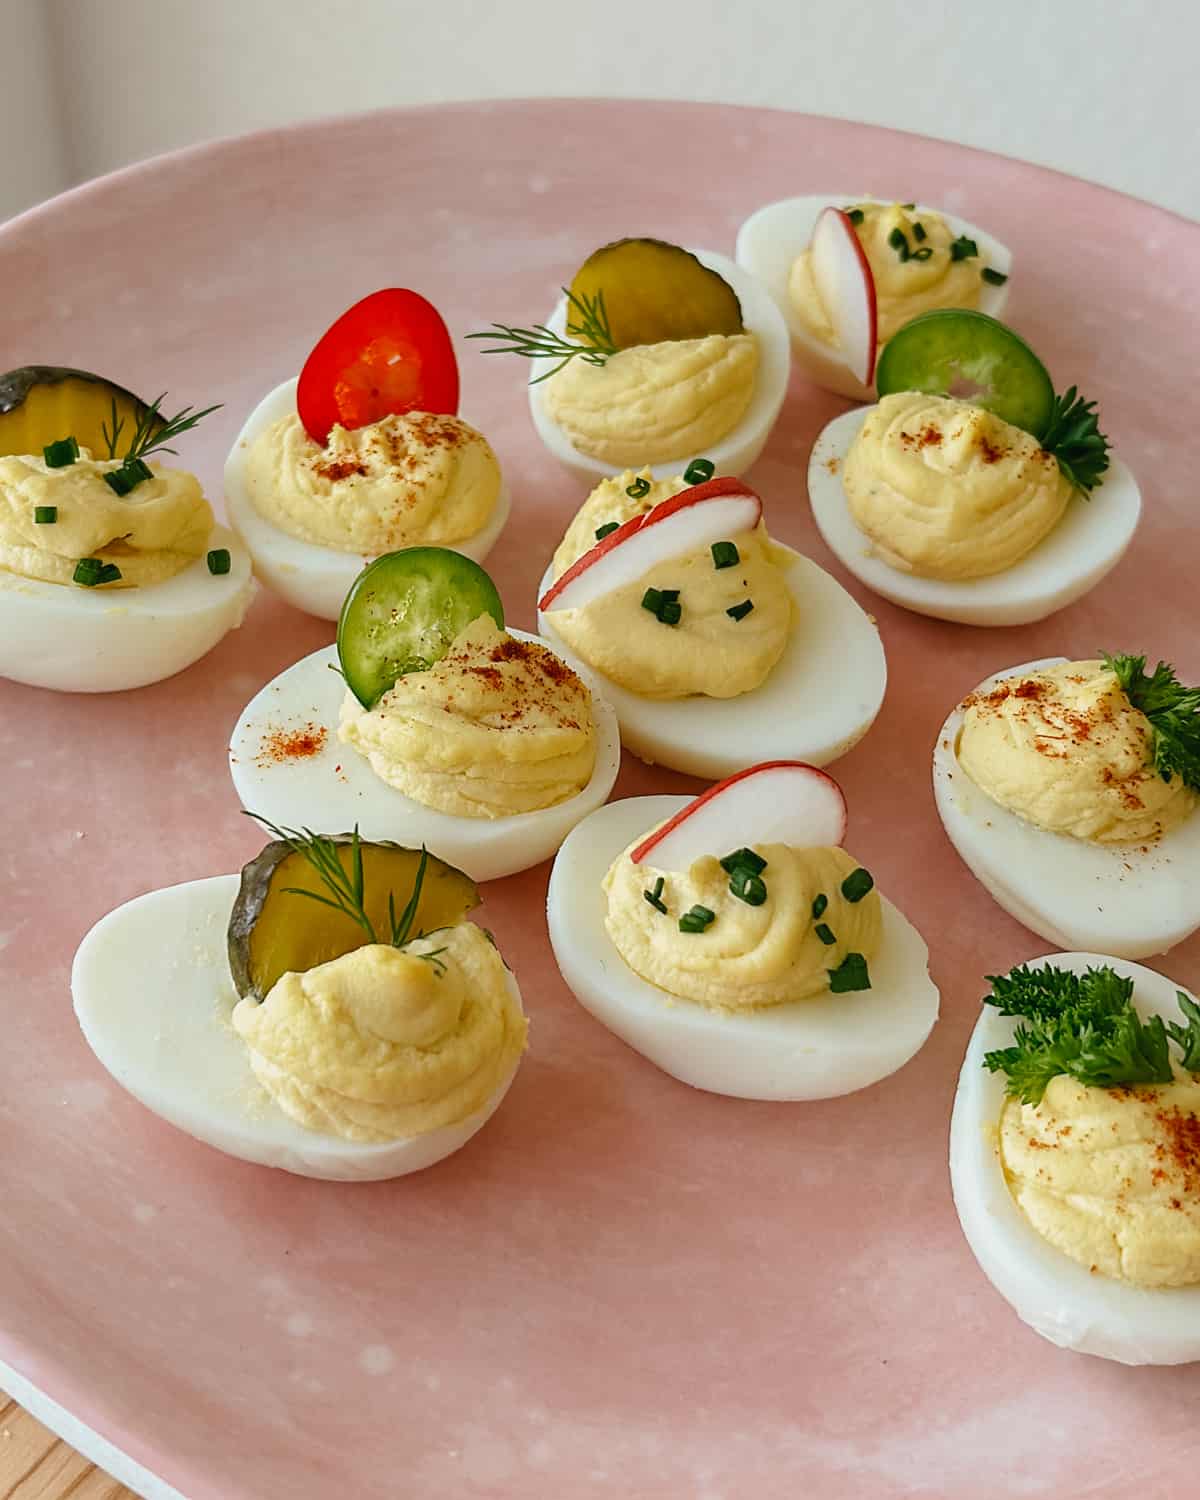 deviled eggs with pickles and radish slices, parsley and peppers on a pink plate